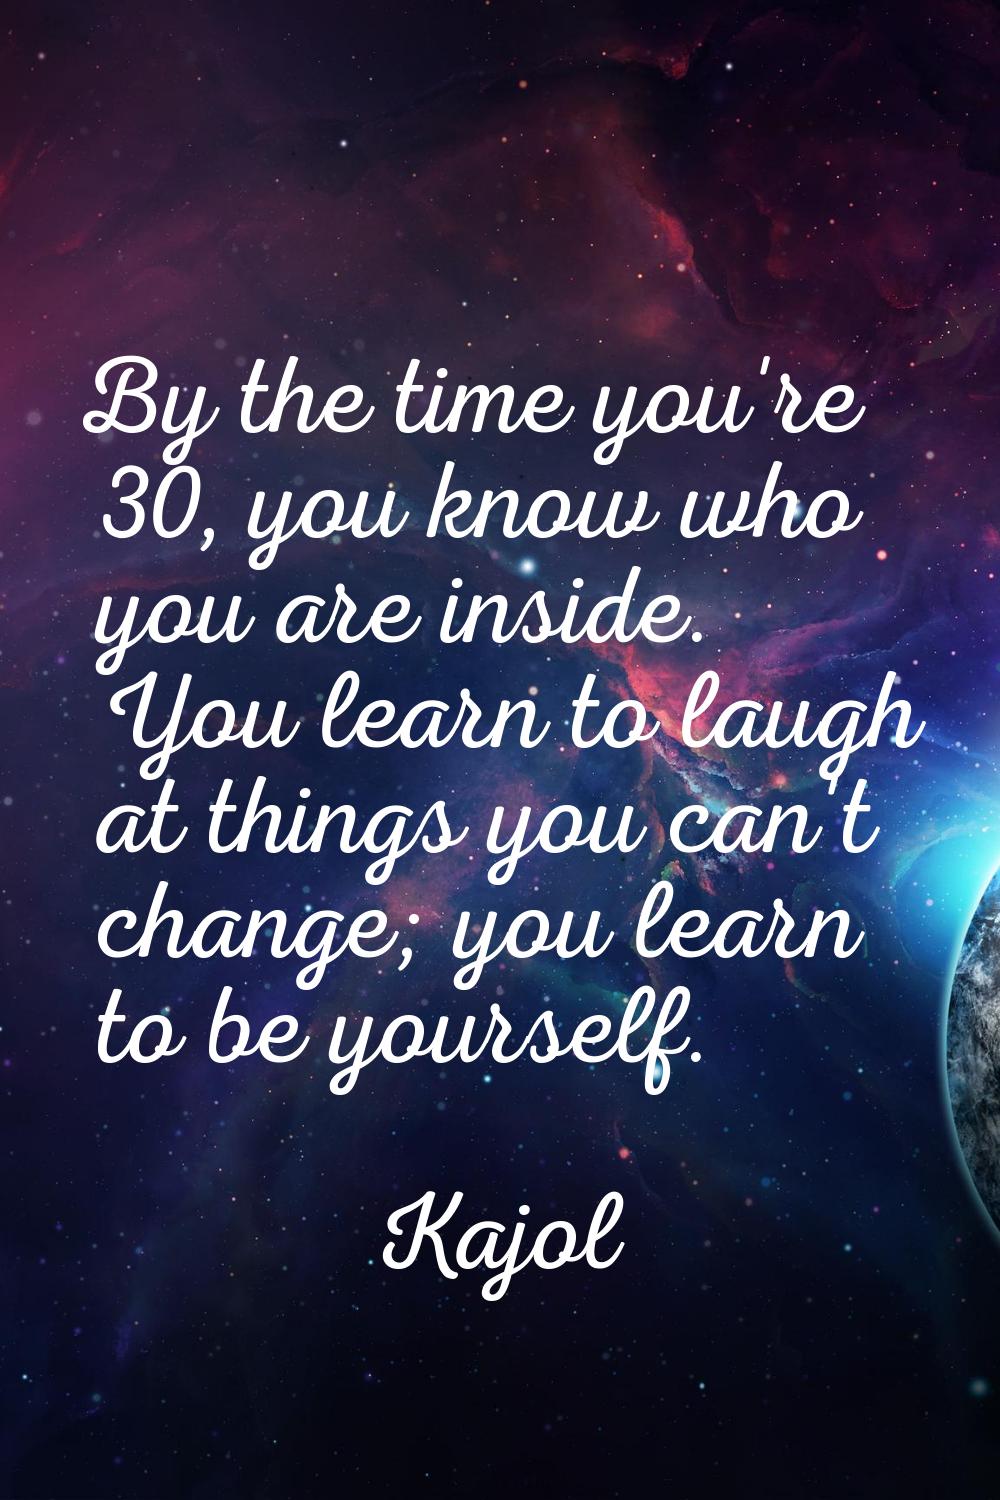 By the time you're 30, you know who you are inside. You learn to laugh at things you can't change; 